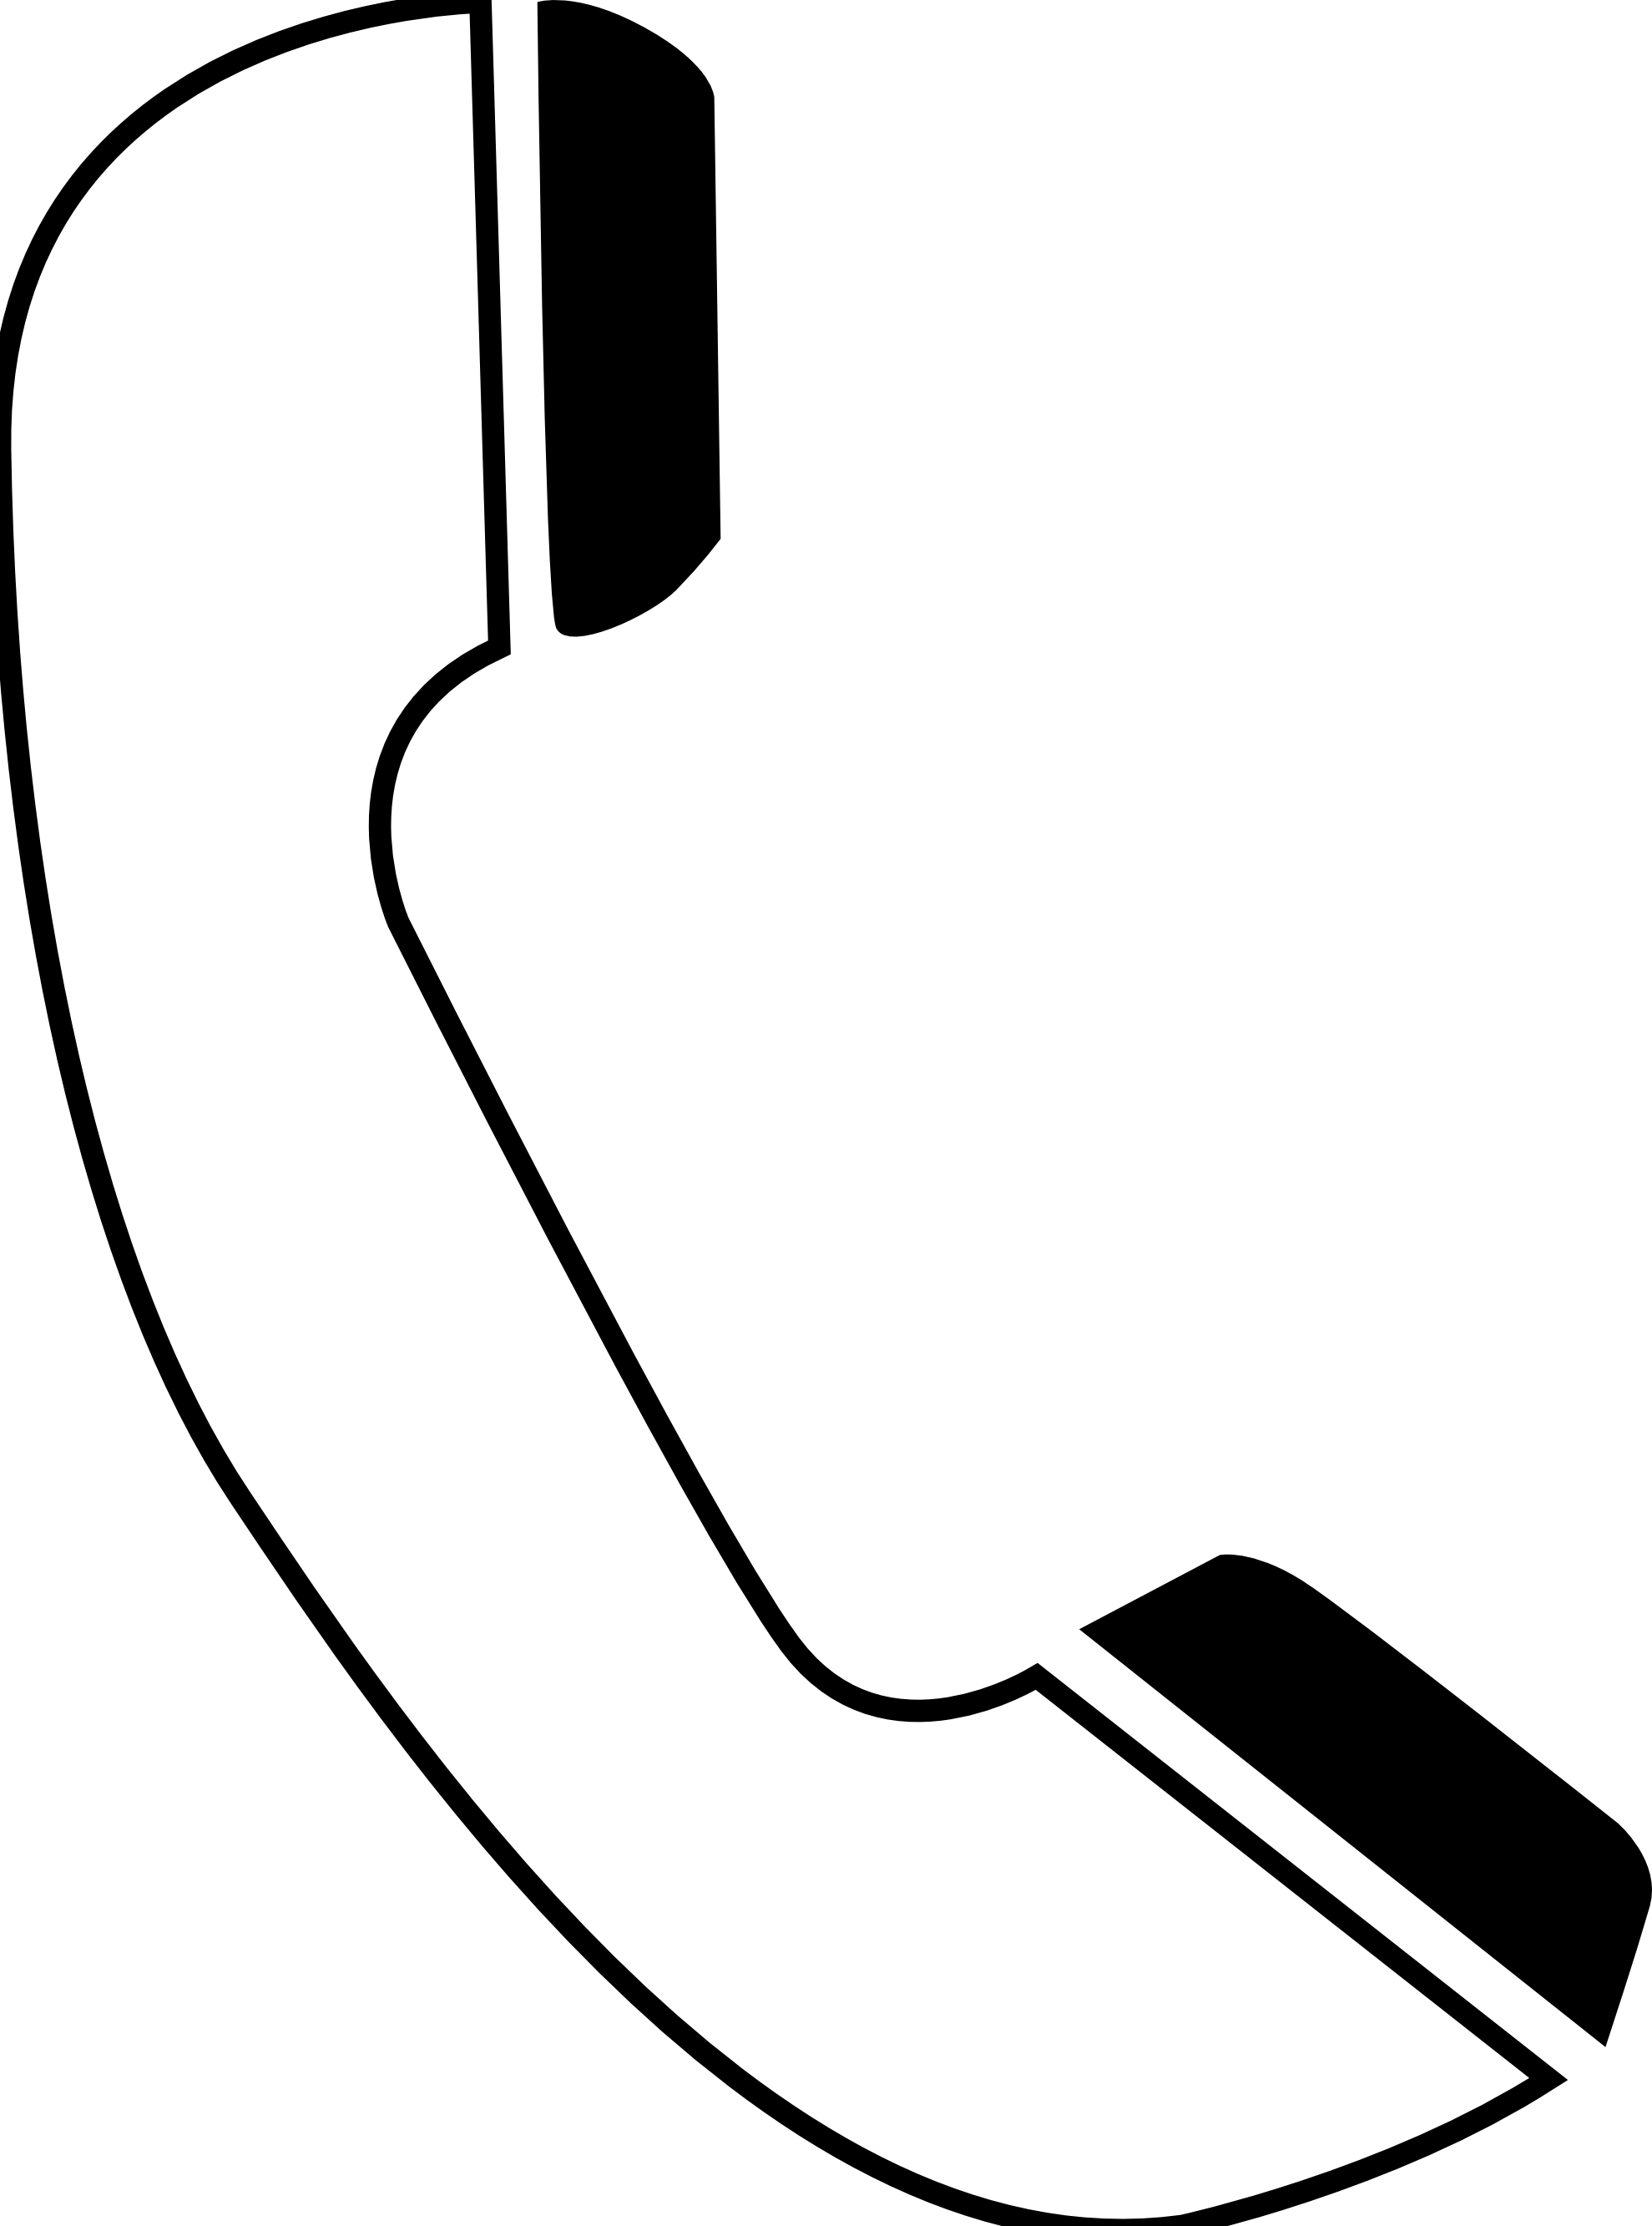 A White Phone Receiver On A Black Background